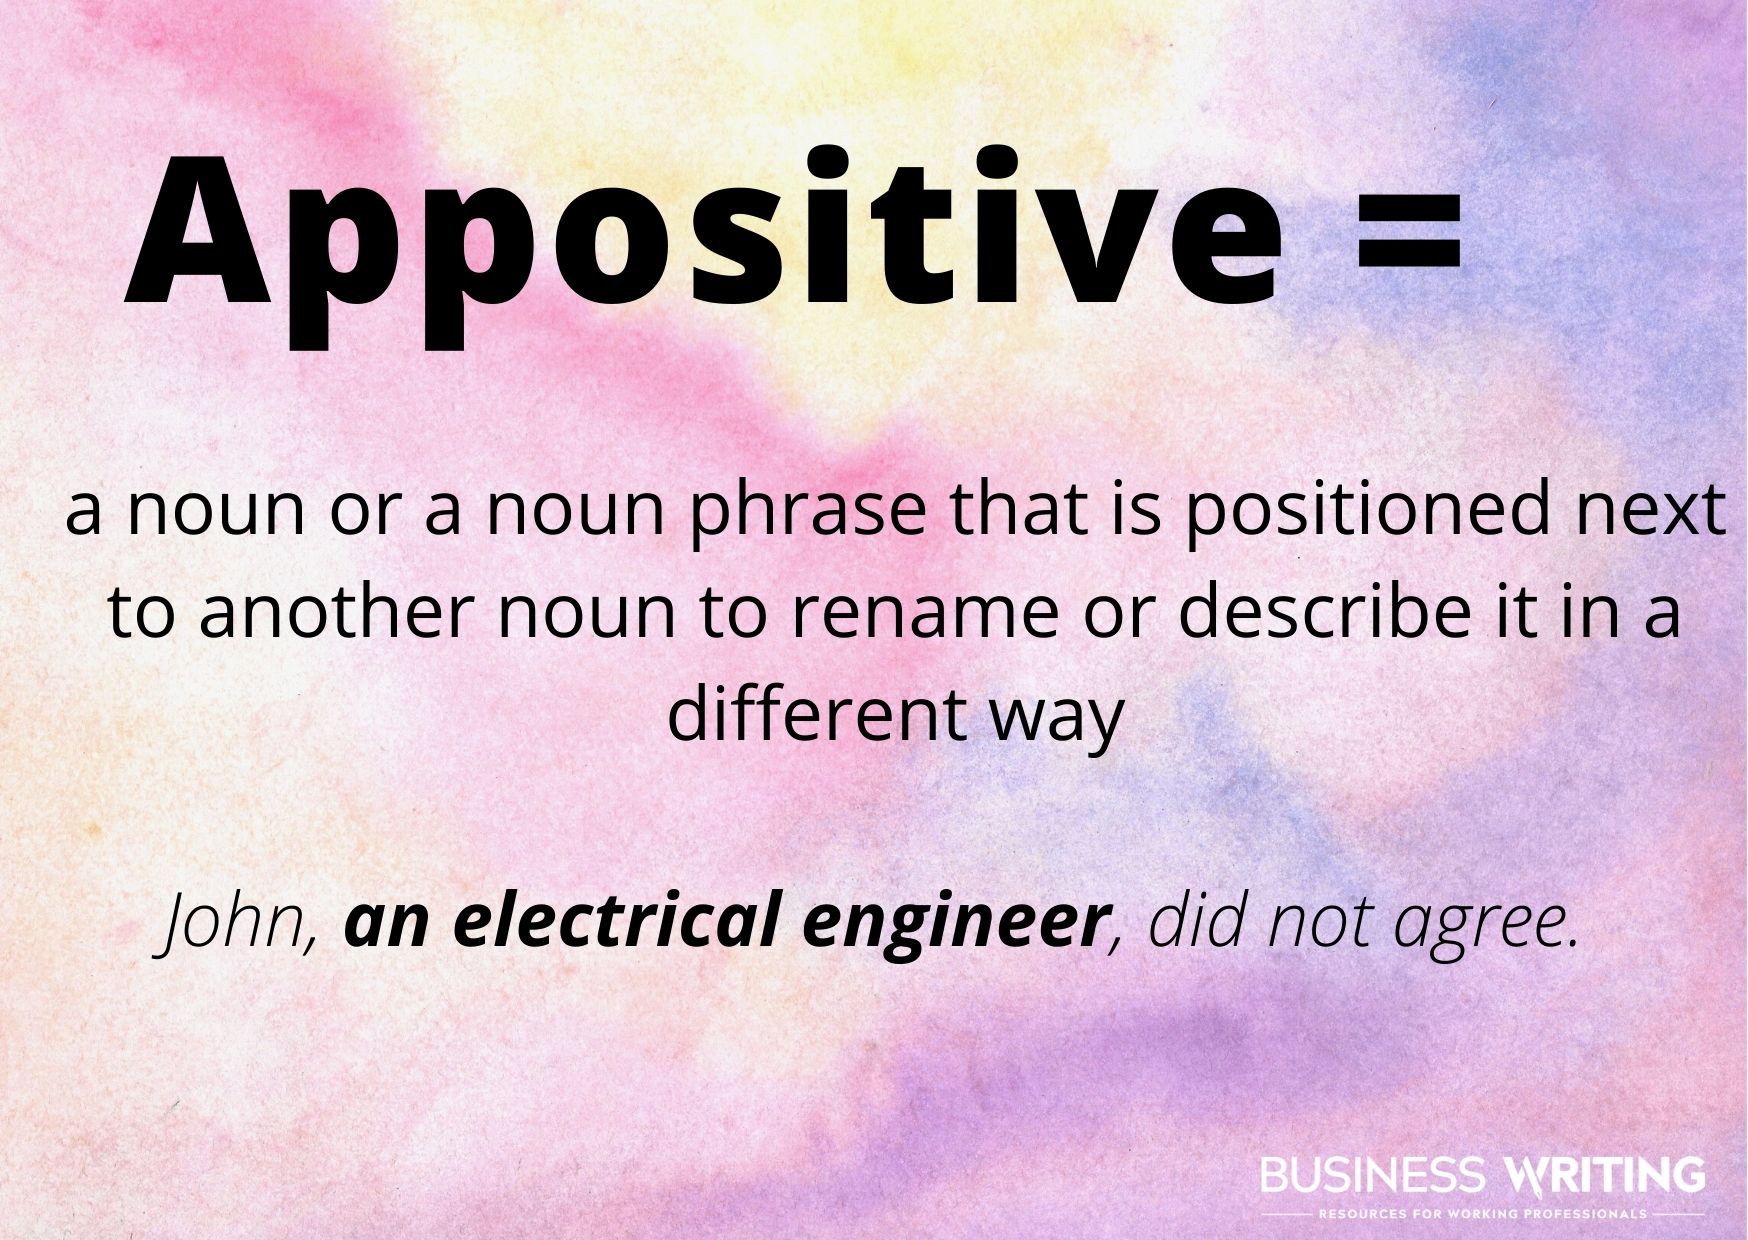 Definition of an Appositive with an appositive phrase example: a noun or a noun phrase that is positioned next to another noun to rename or describe it in a different way. Example: John, an electrical engineer, did not agree